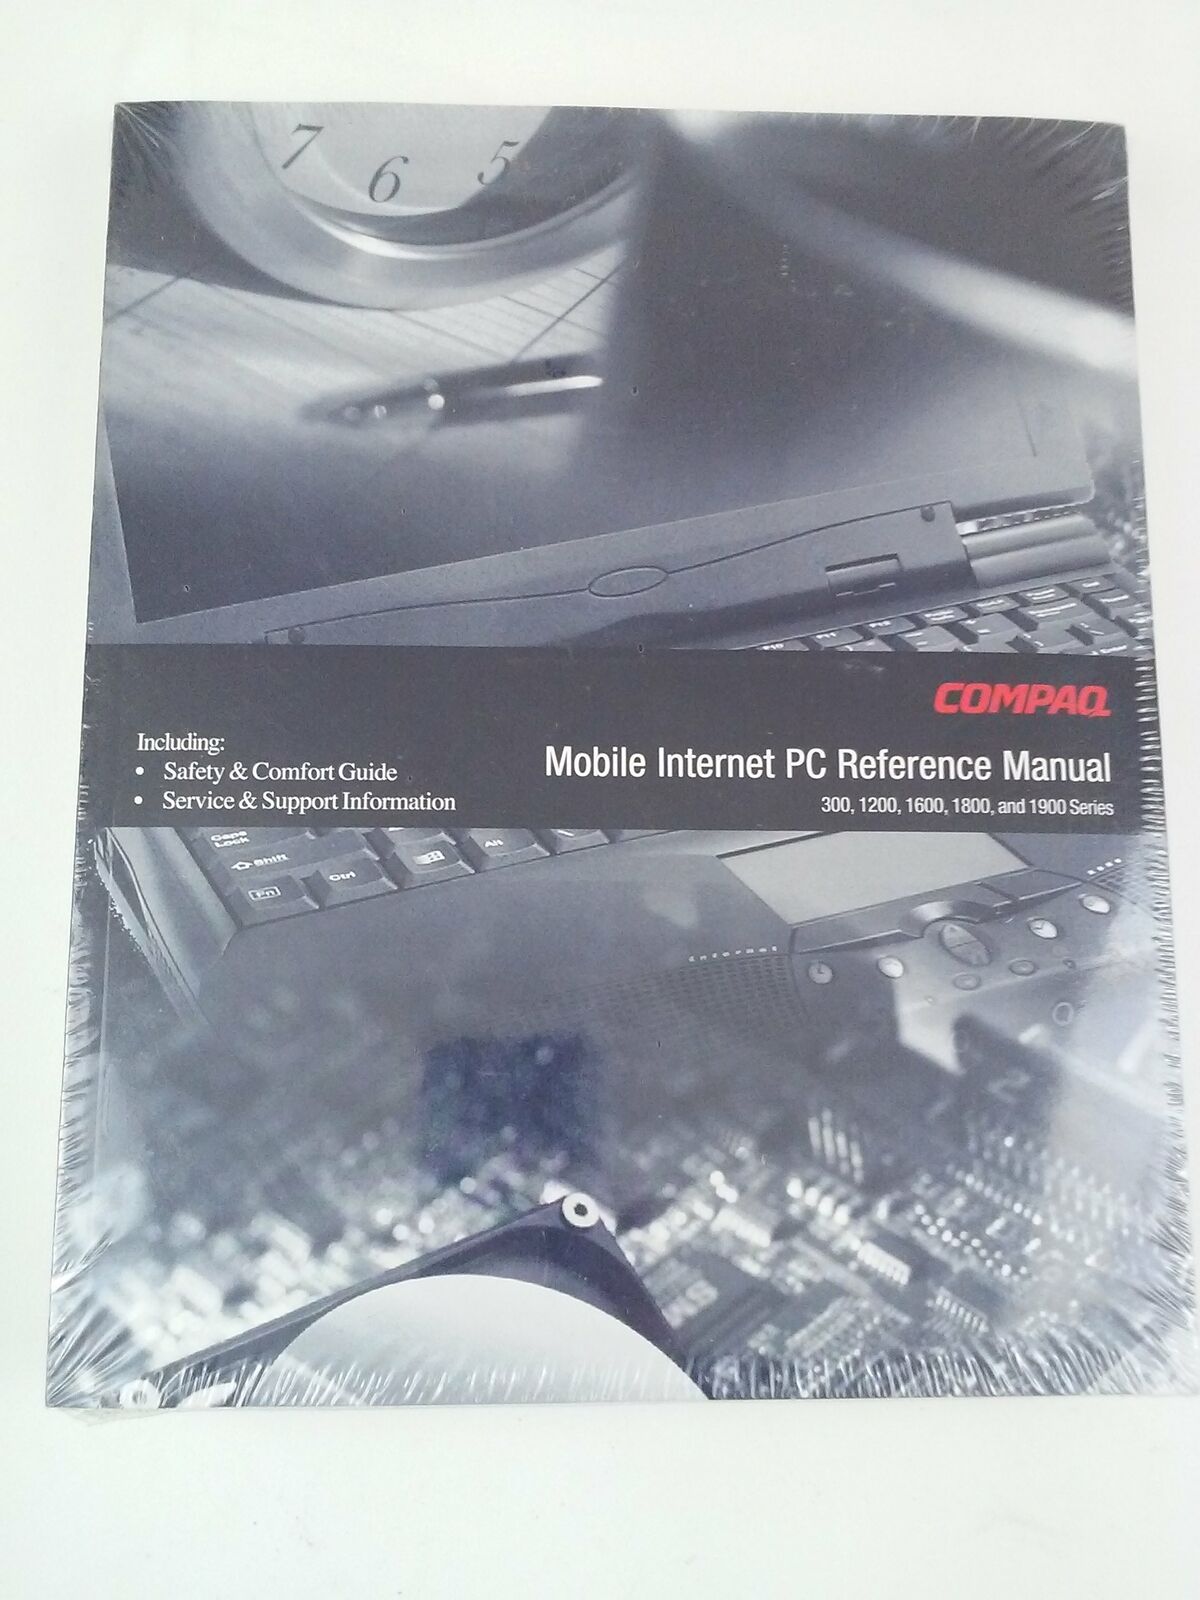 Compaq Mobile Internet PC Reference Manual X04-15747 PC